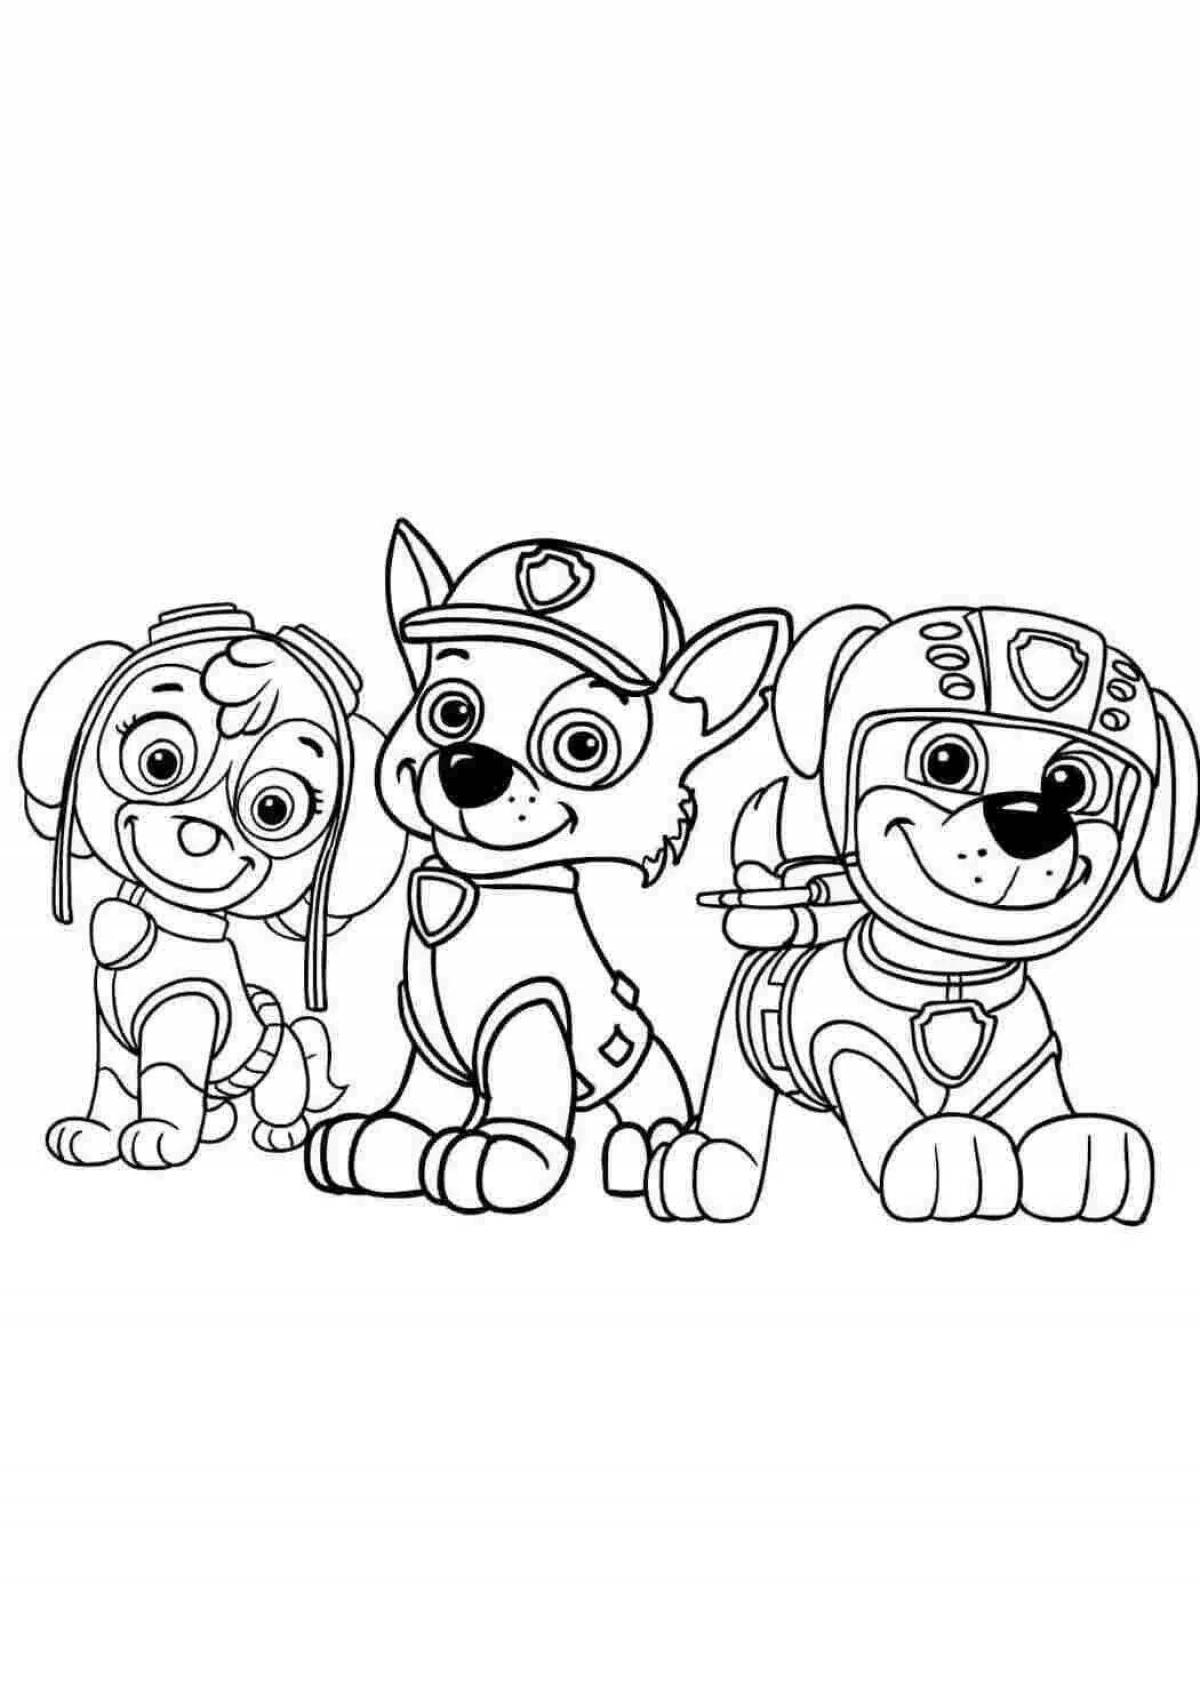 Color-explosion paw patrol coloring book for kids 5 years old